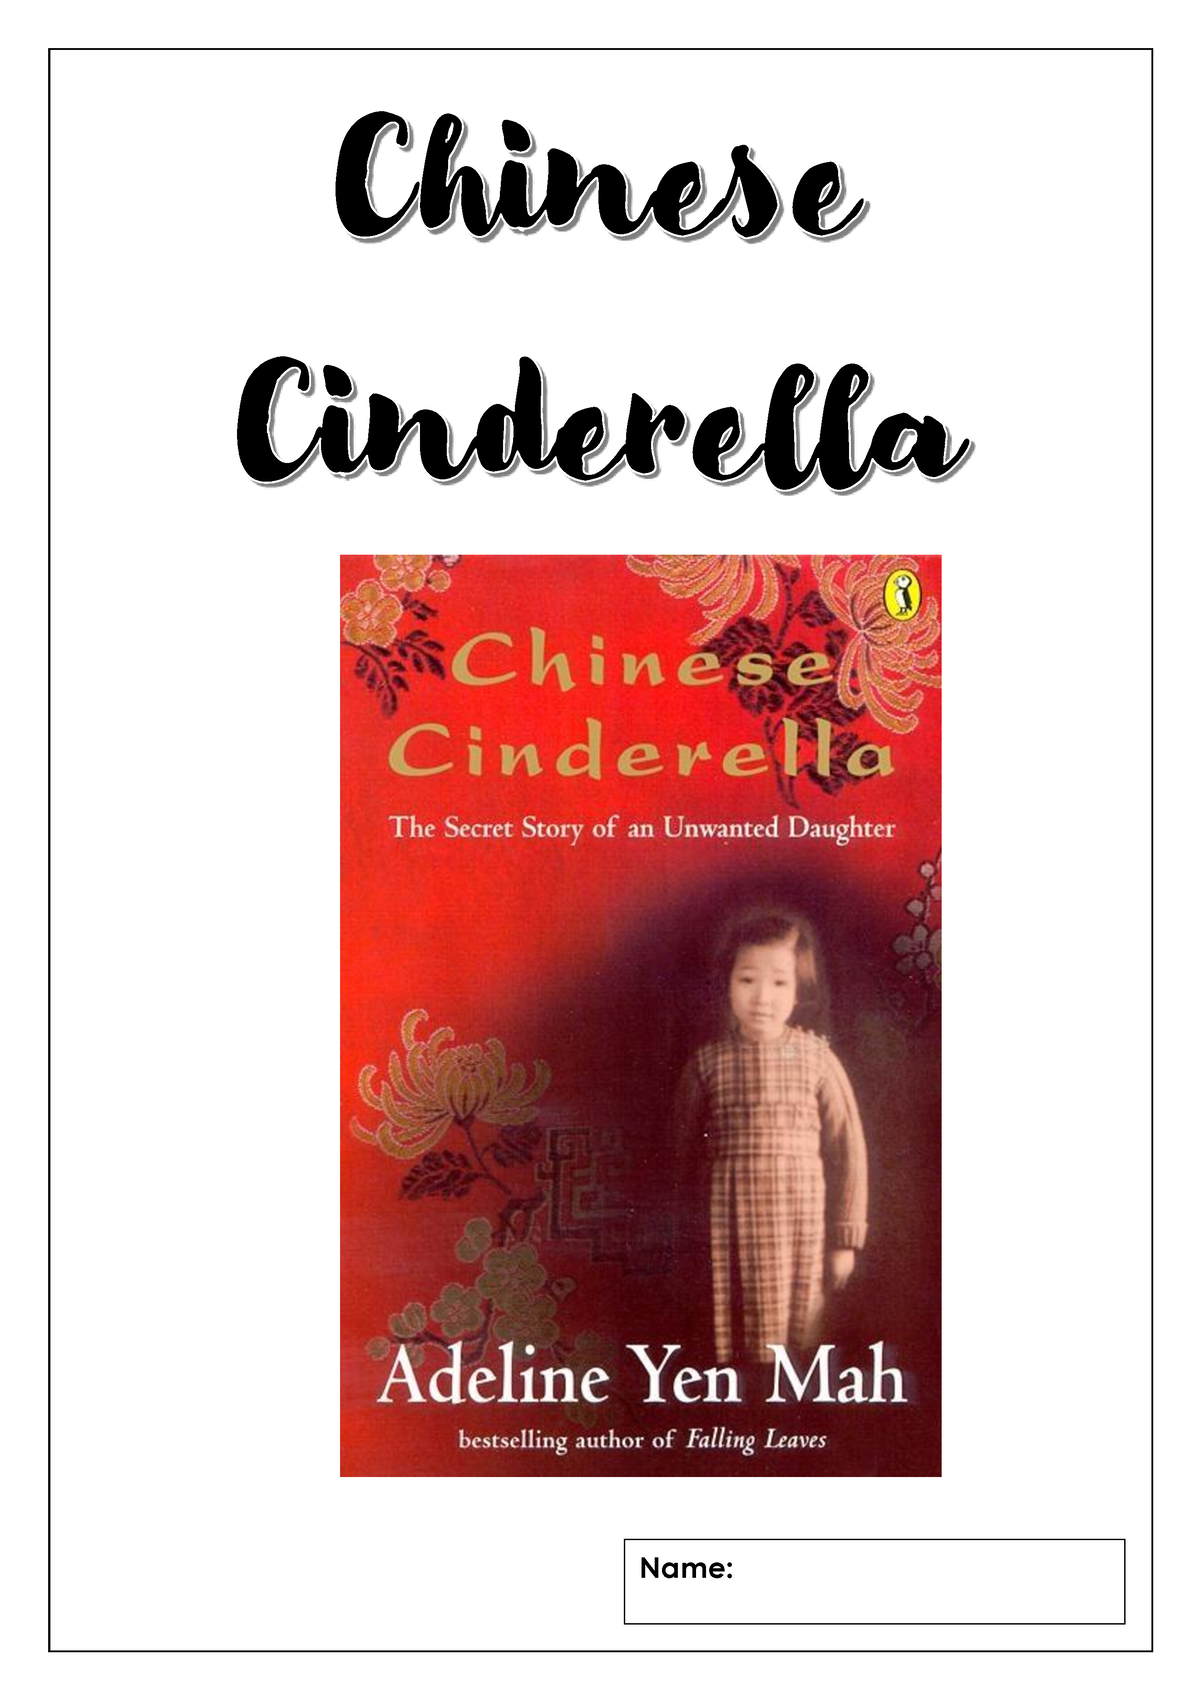 book review of chinese cinderella